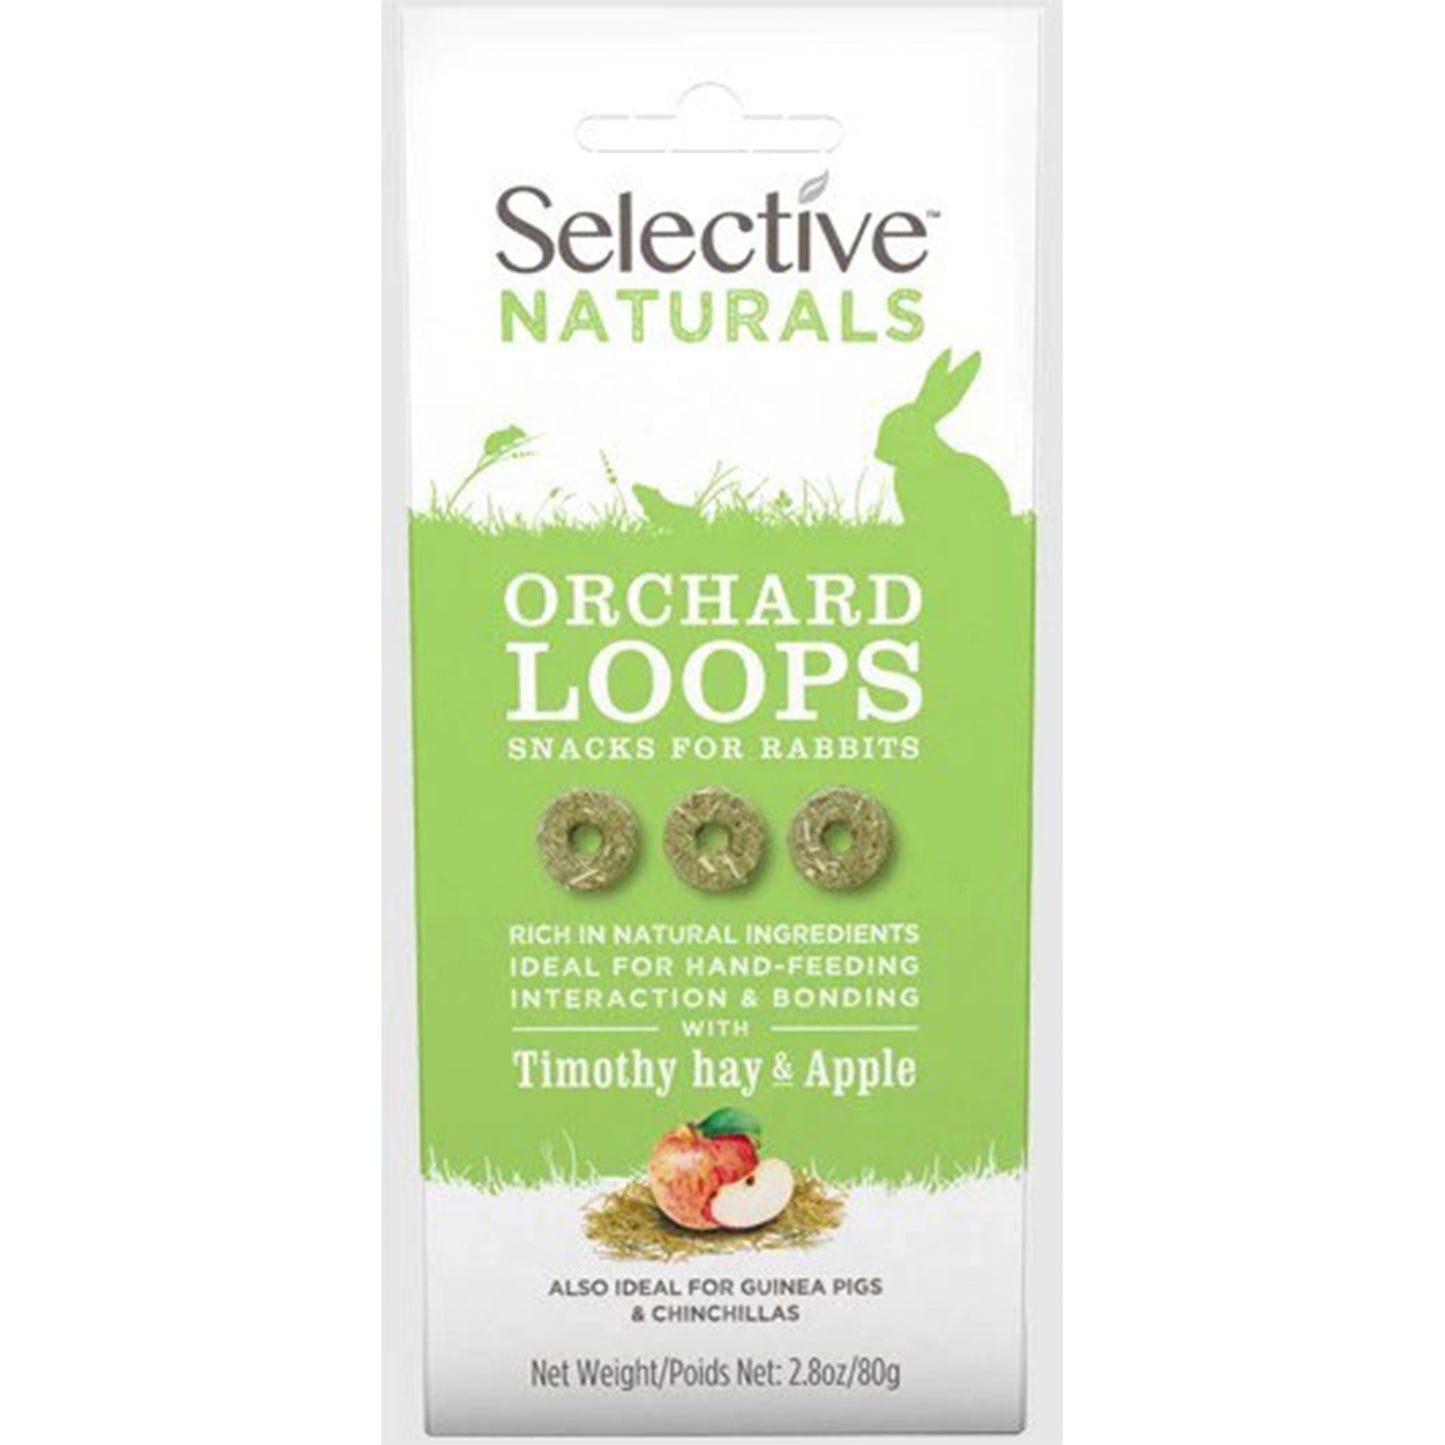 Supreme Pet Foods Selective Naturals Orchard Loops With Timothy Hay and Apple - 2.8 oz